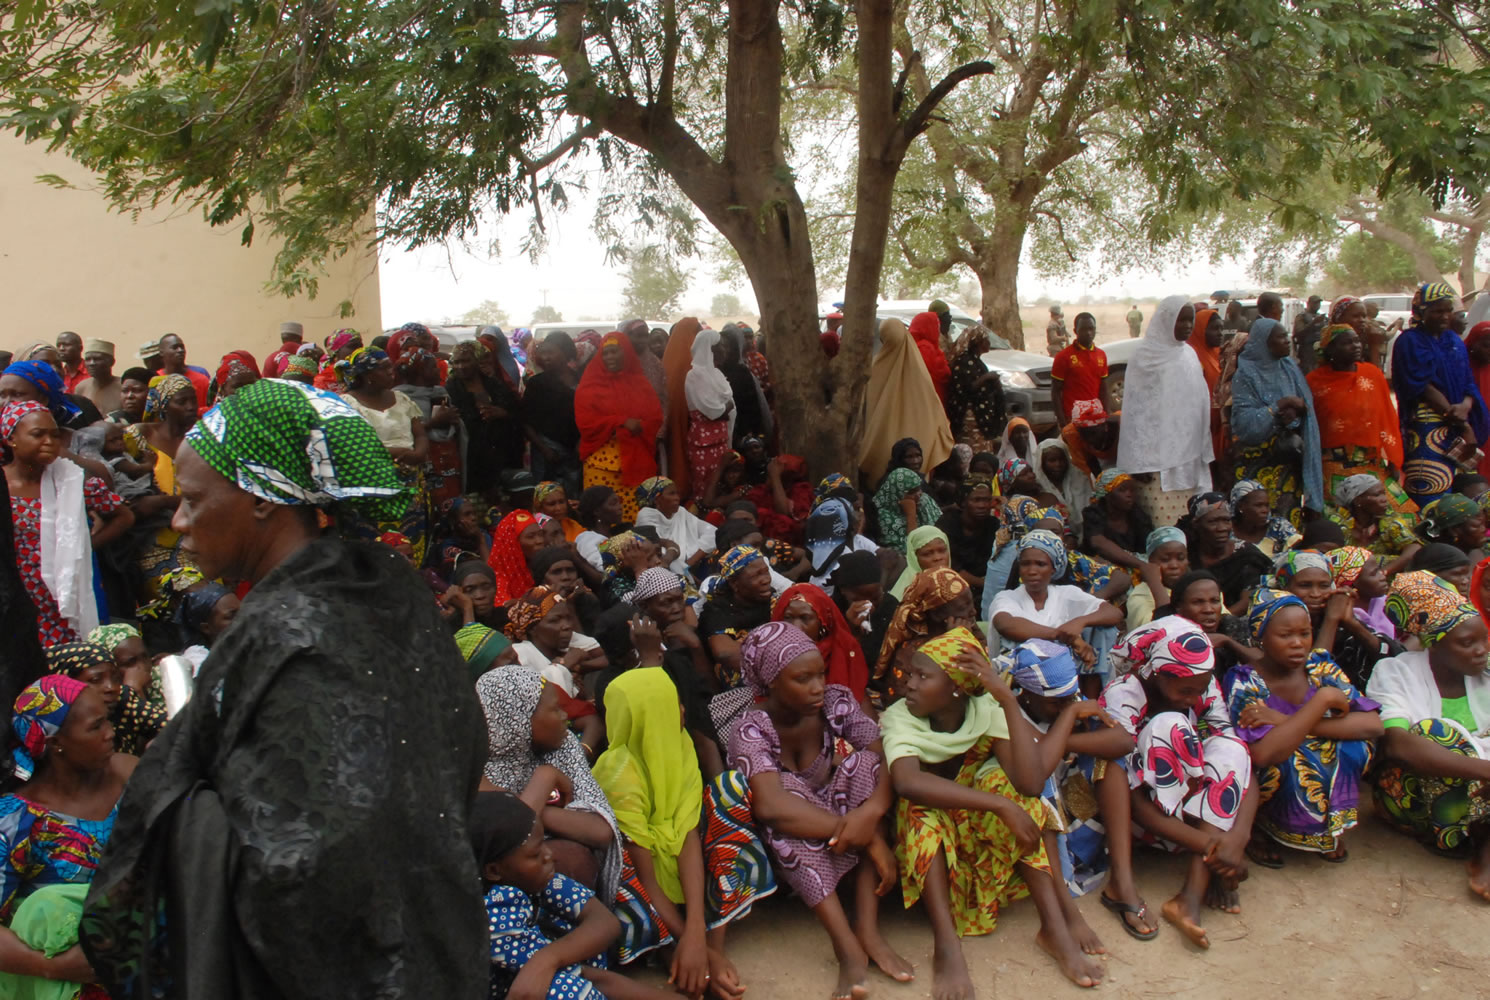 Associated Press
Mothers and some of the kidnapped school girls from the government secondary school Chibok, who managed to escape, gather Monday under a tree prior to the visit of Nana Shettima, the wife of Borno Gov. Kashim Shettima, in Chibok, Nigeria.